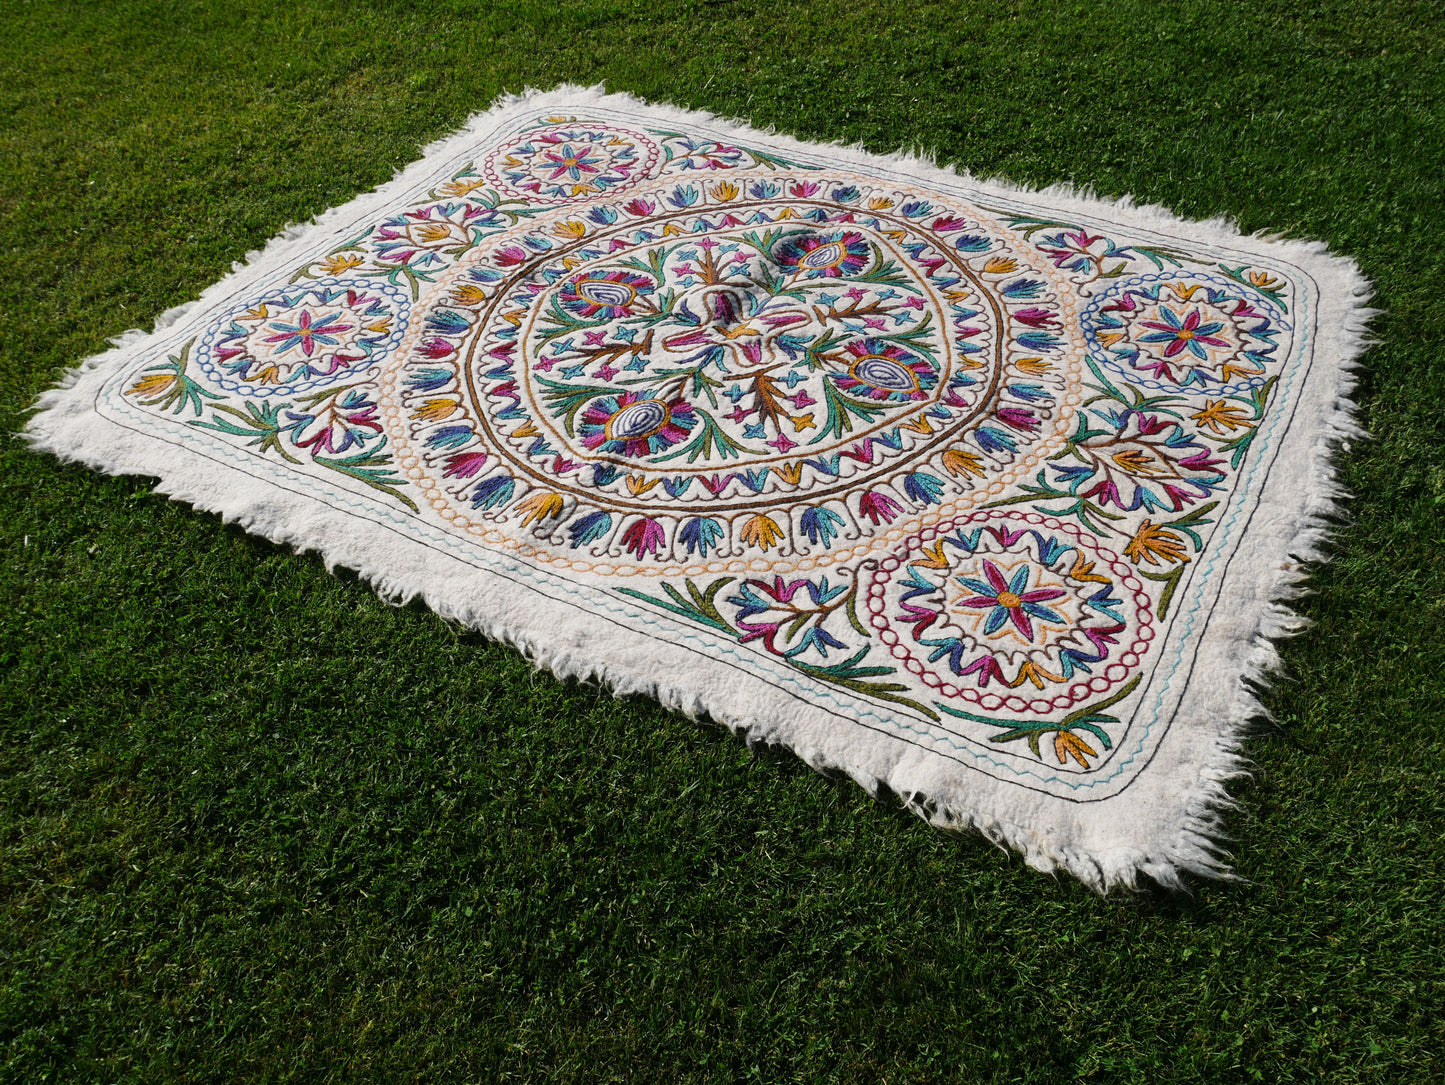 Hand-Felted 7x5 Flower Wool Rug "Namda" from Kashmir - Unique Floral Embroidery on Sheep Wool Felt Base - Boho Decor for Cozy Floors and Hippie Homes